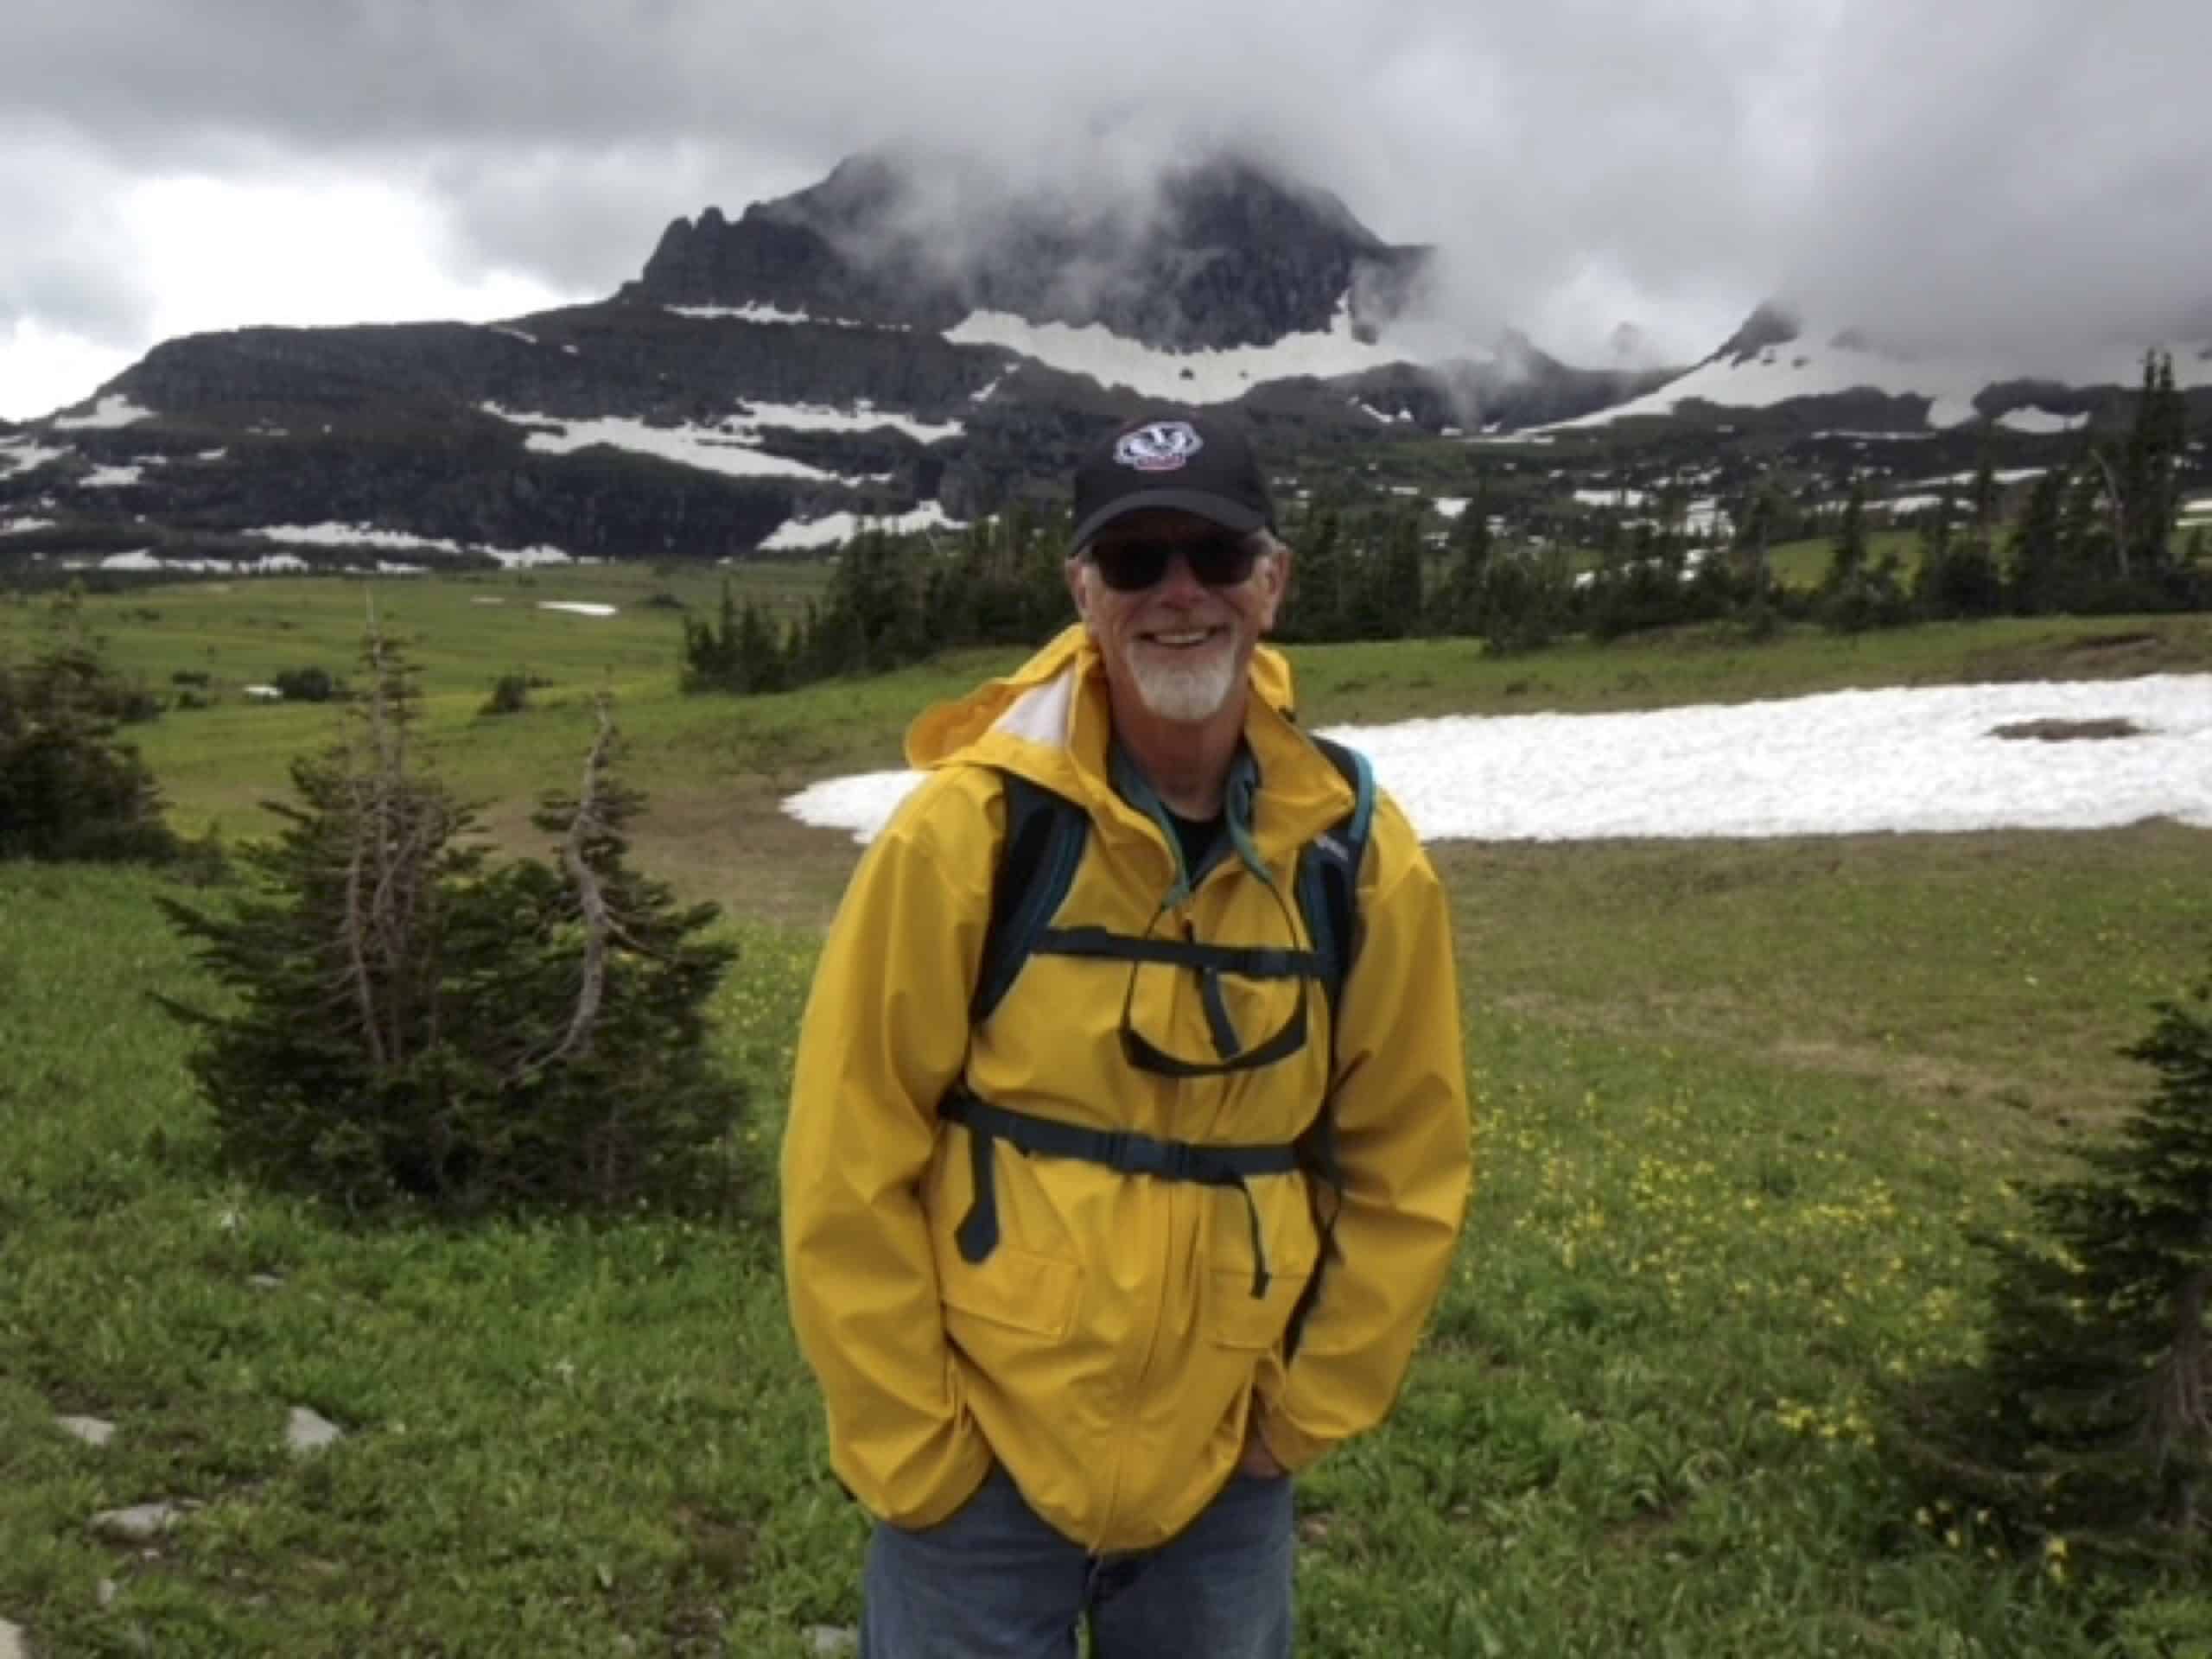 Dr. Jim Thorne posing with a mountain behind him